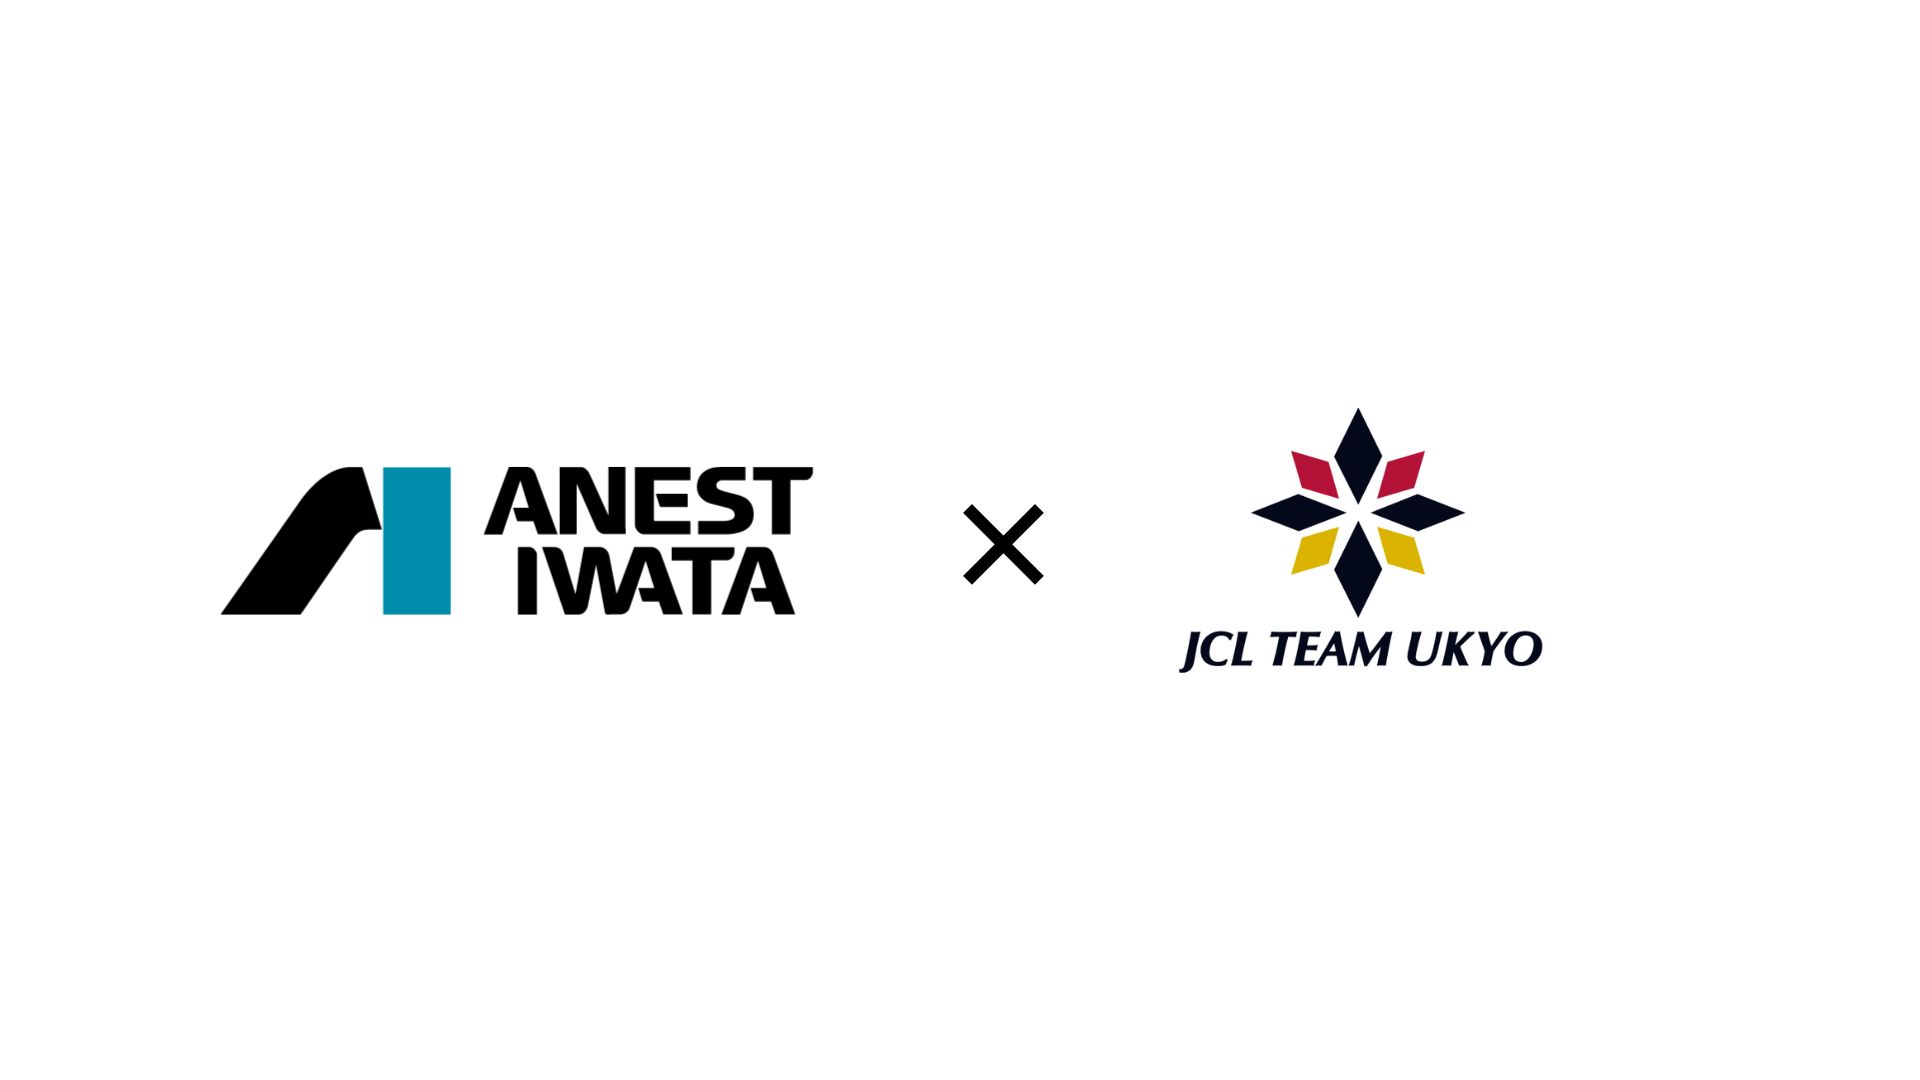 Anest Iwata signs partnership agreement with JCL TEAM UKYO